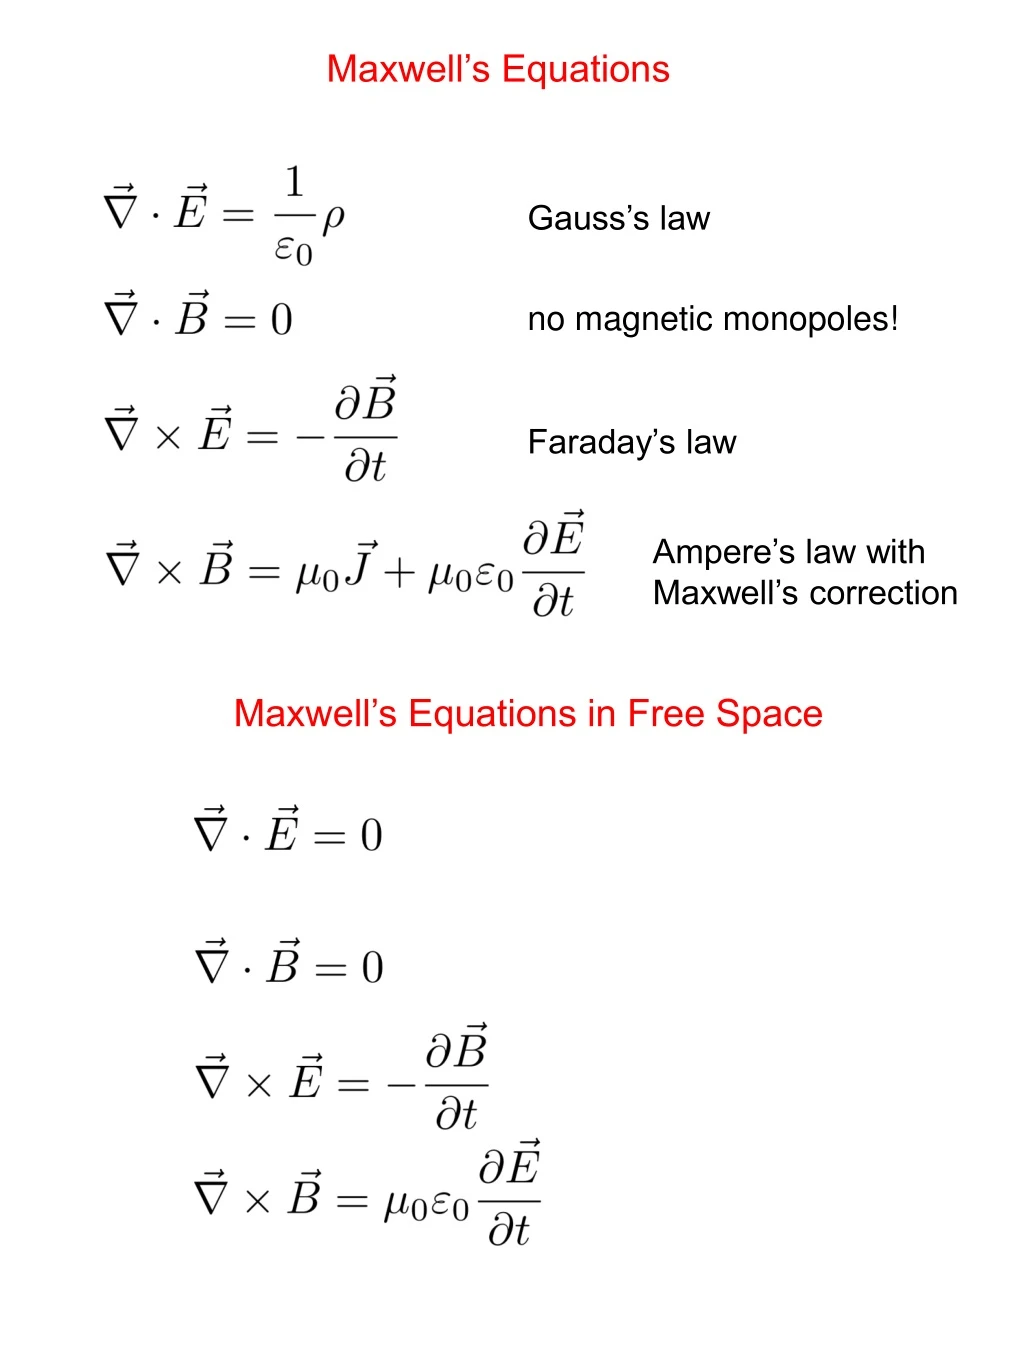 maxwell s equations